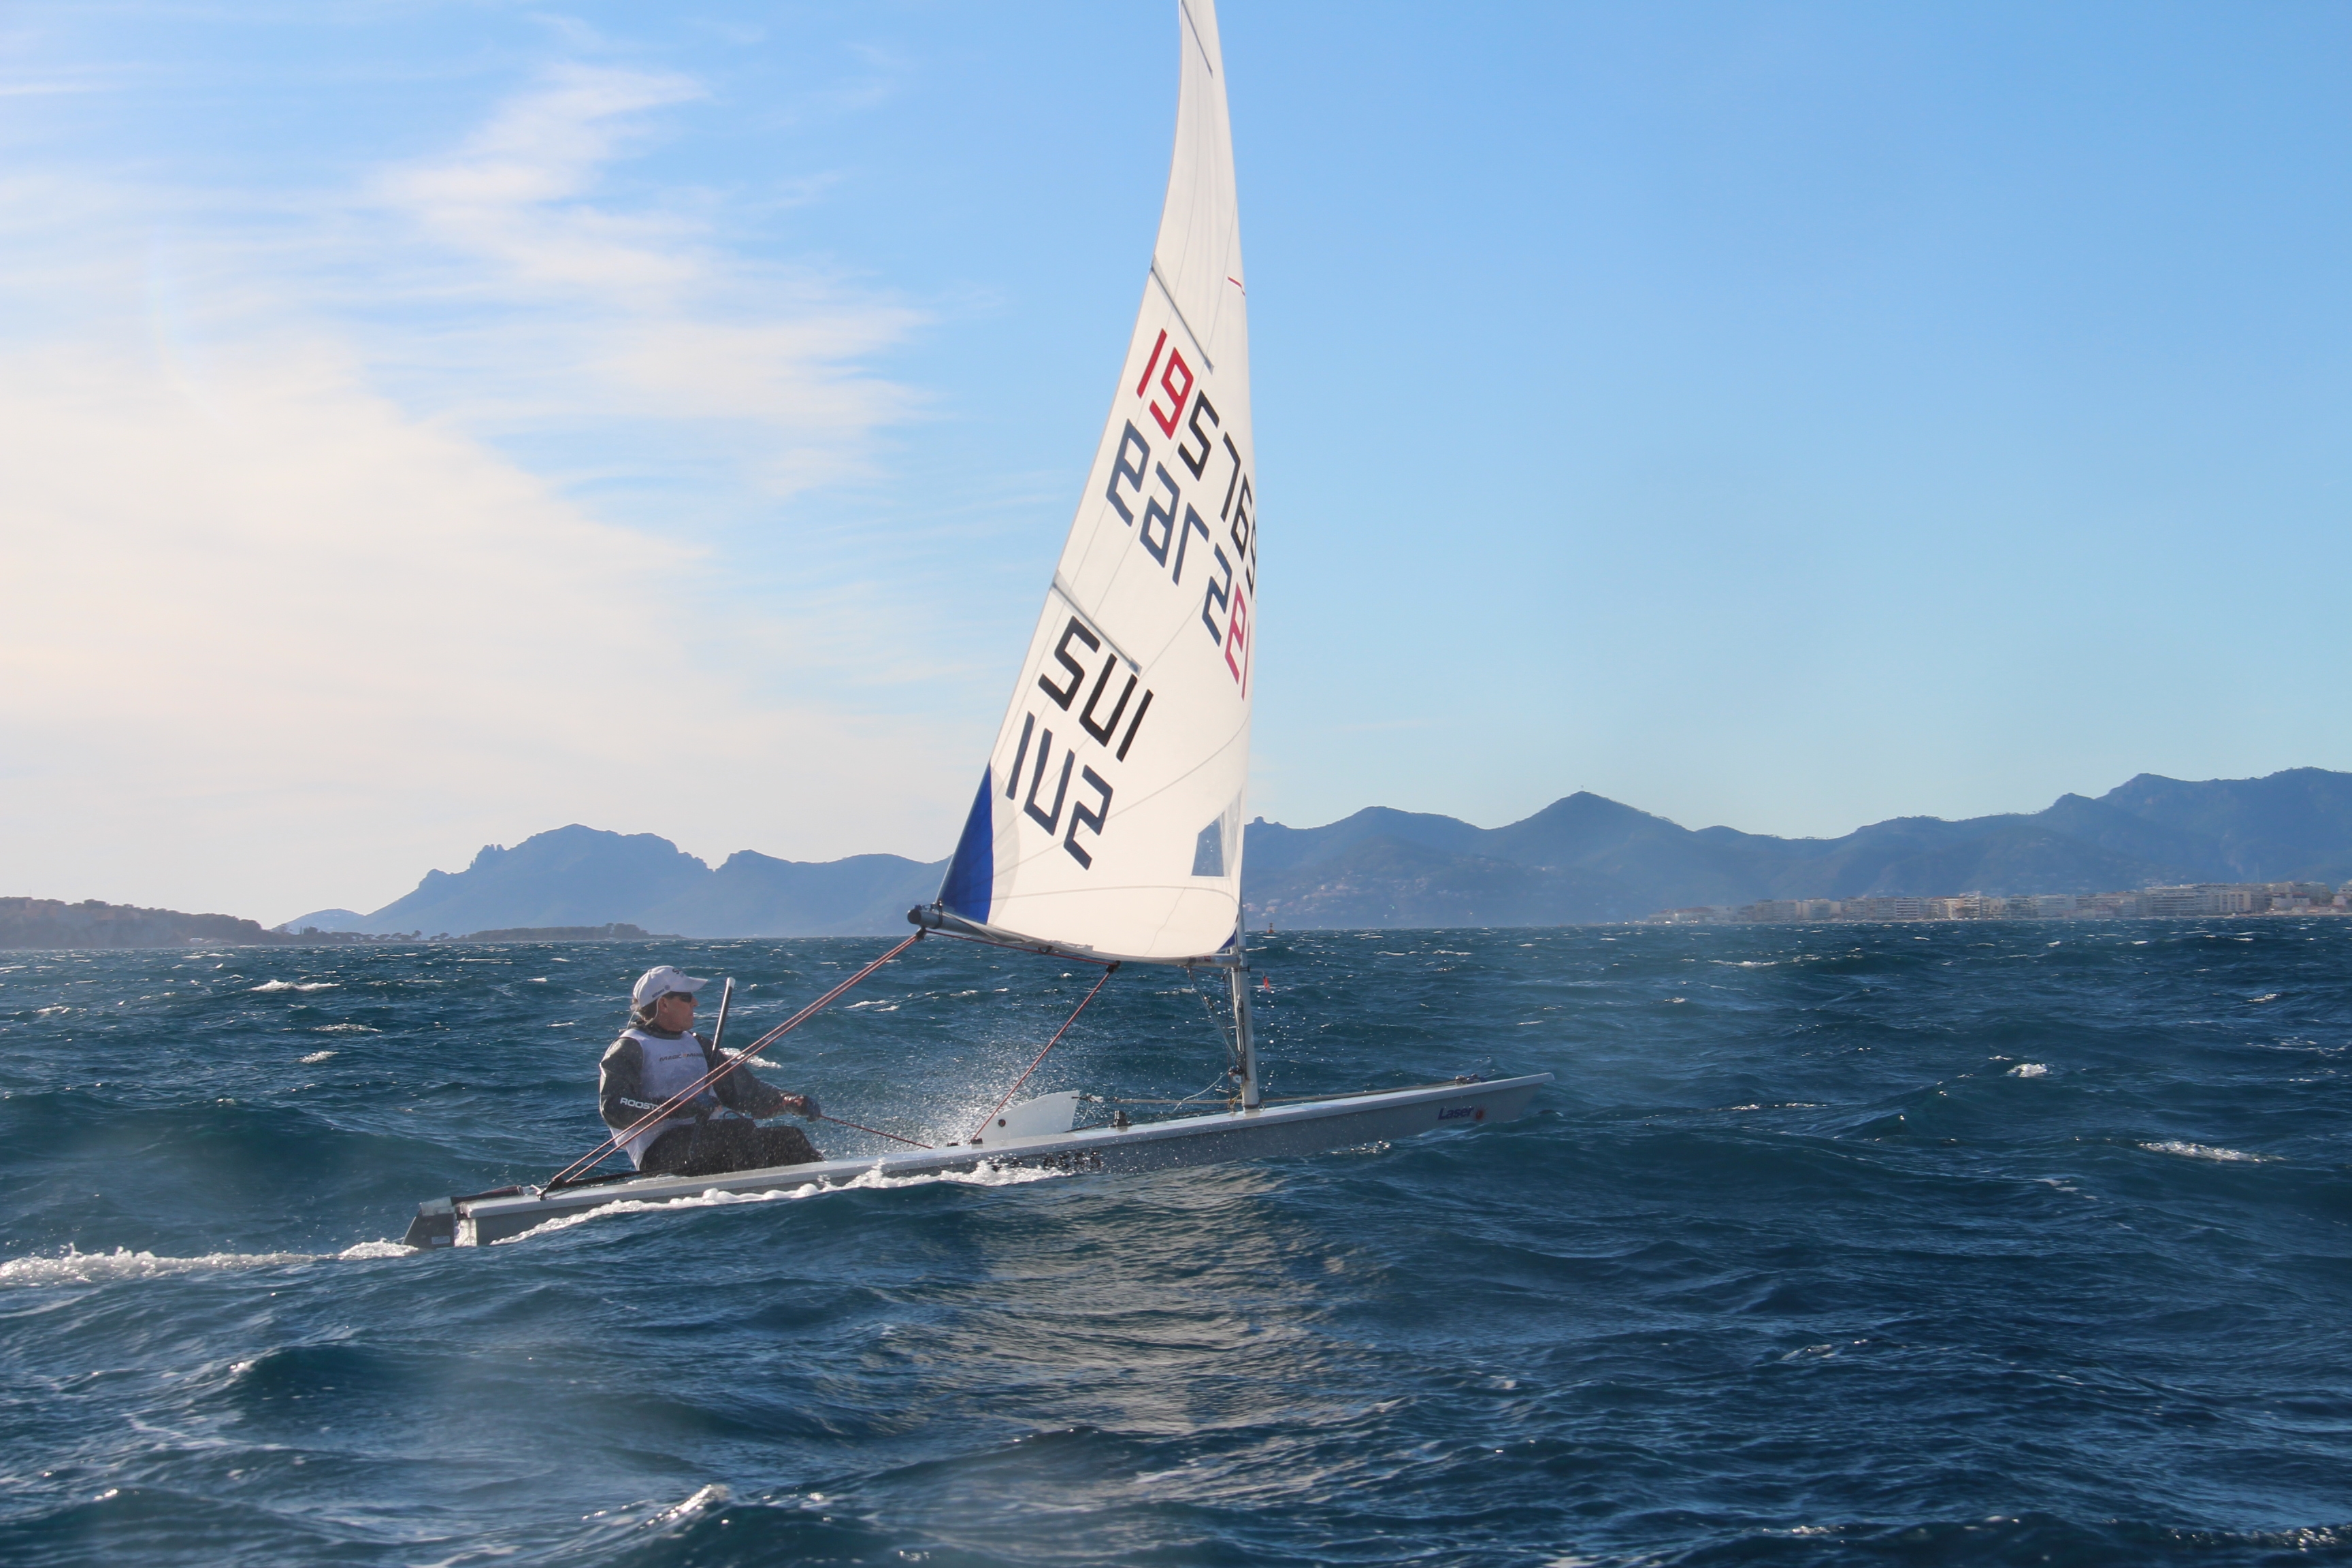  Laser  EuroMasters  Act 1  Antibes FRA  Final results, the Swiss